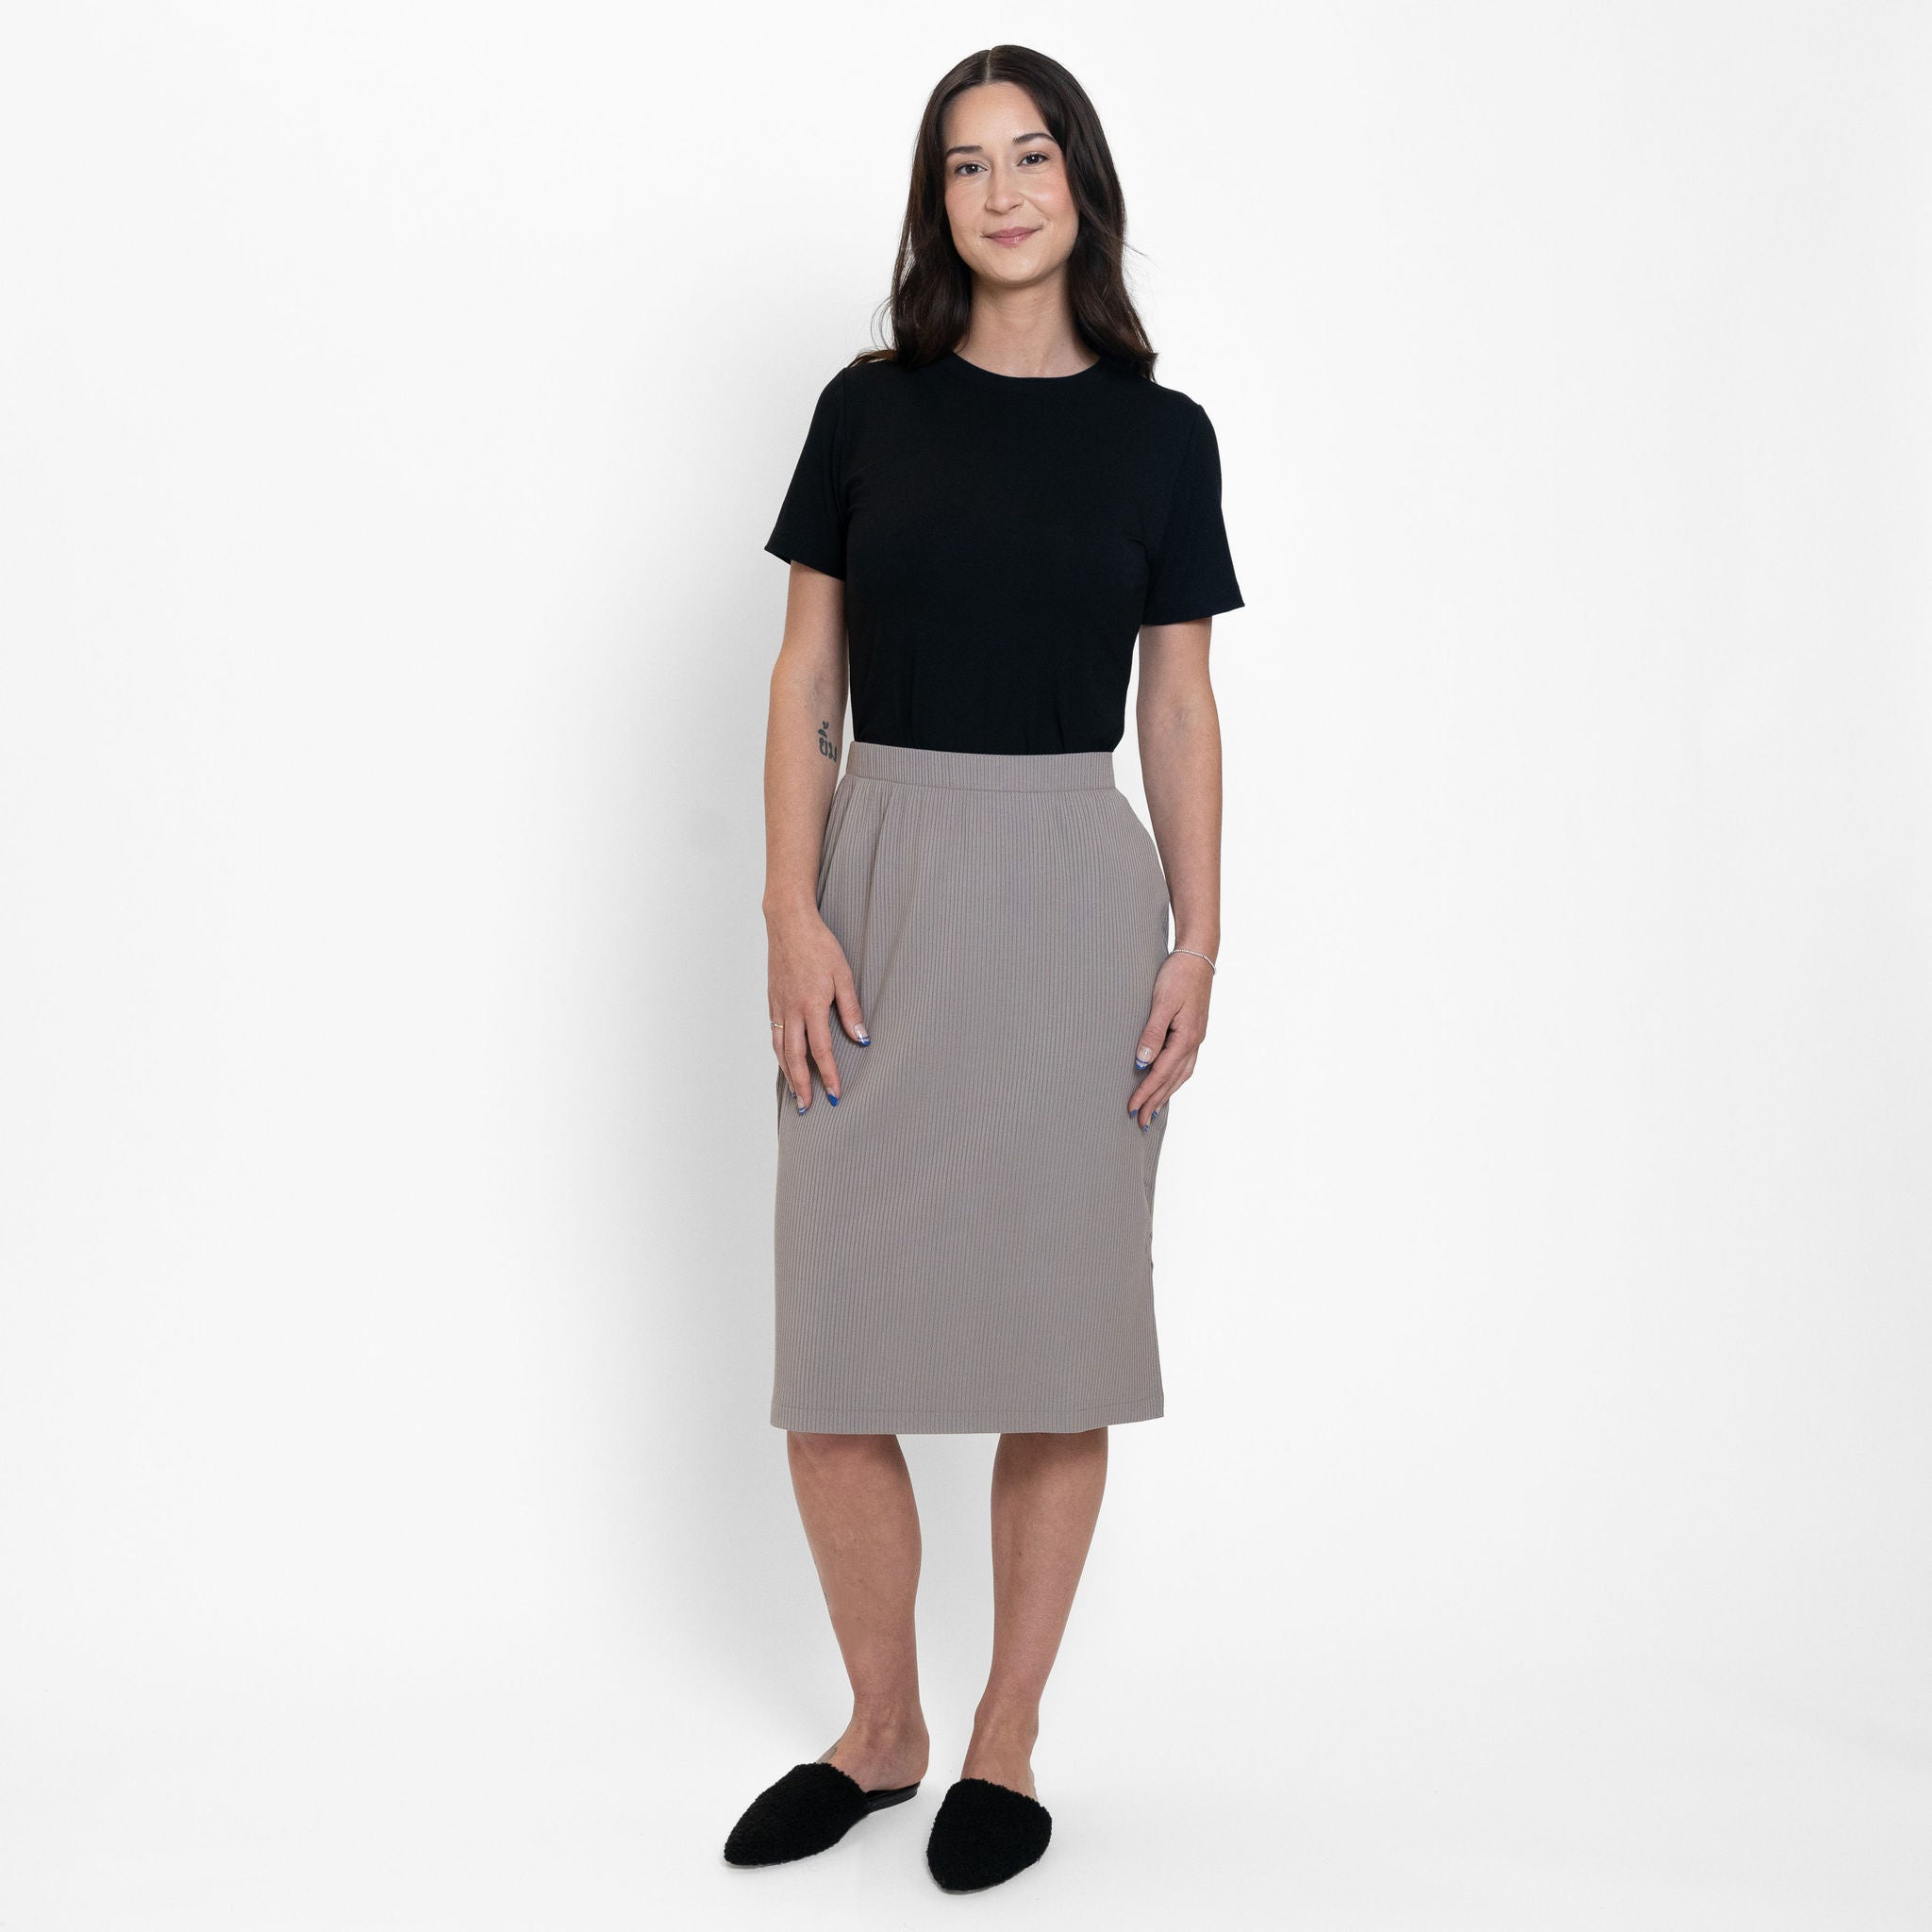 Woman wearing beige body-skimming fit stretchy mid calf length vertical ribbed skirt  with tucked in black crew neckline t-shirt